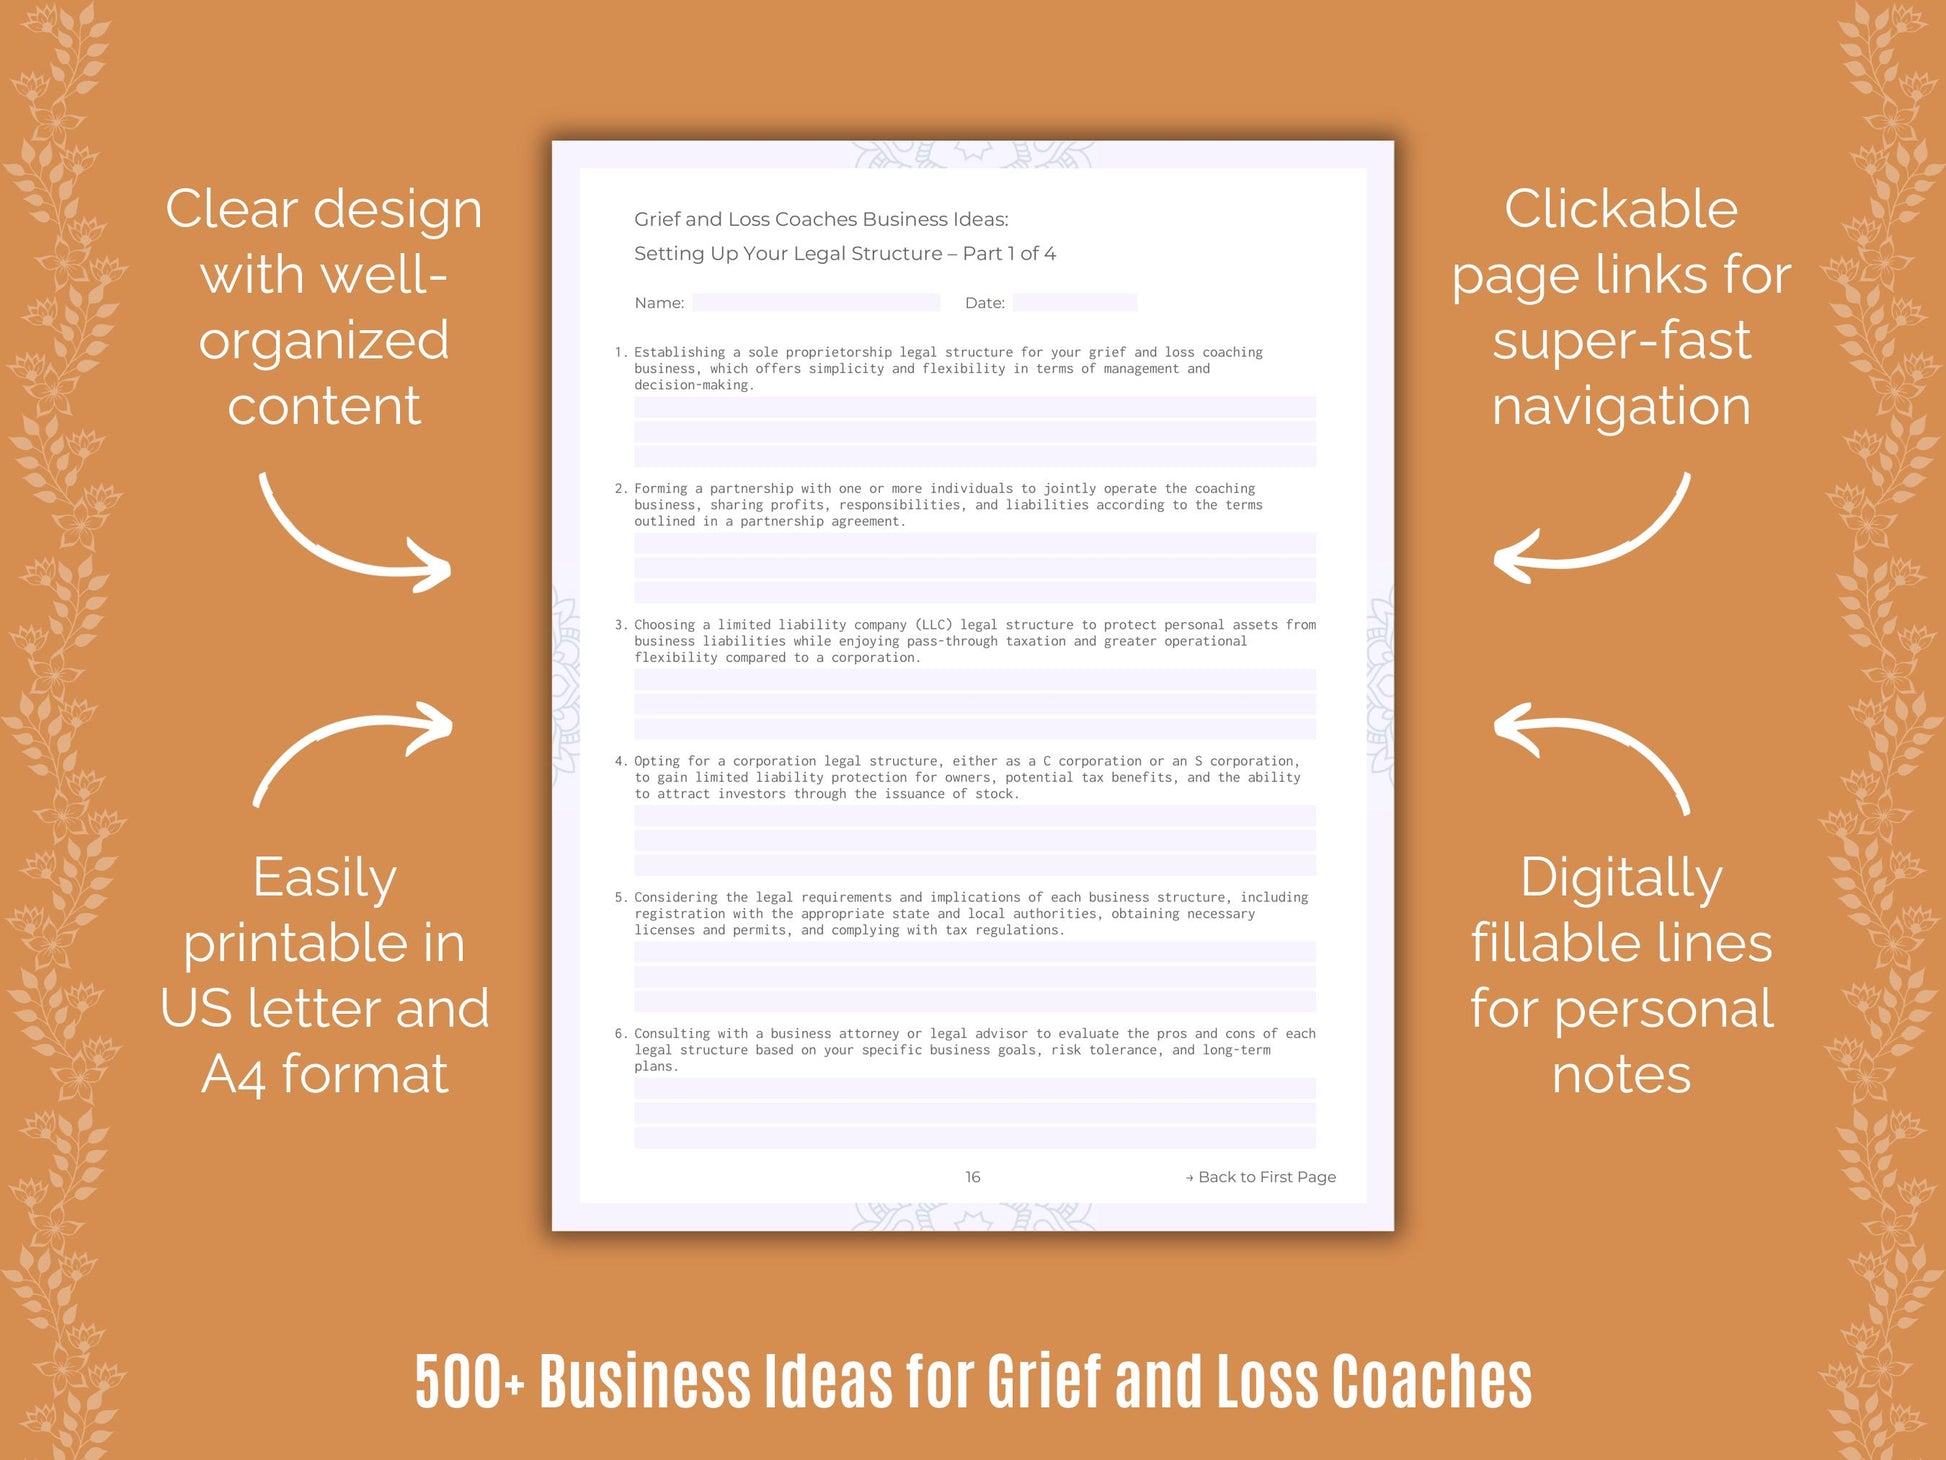 Grief and Loss Coaches Business Ideas Resource